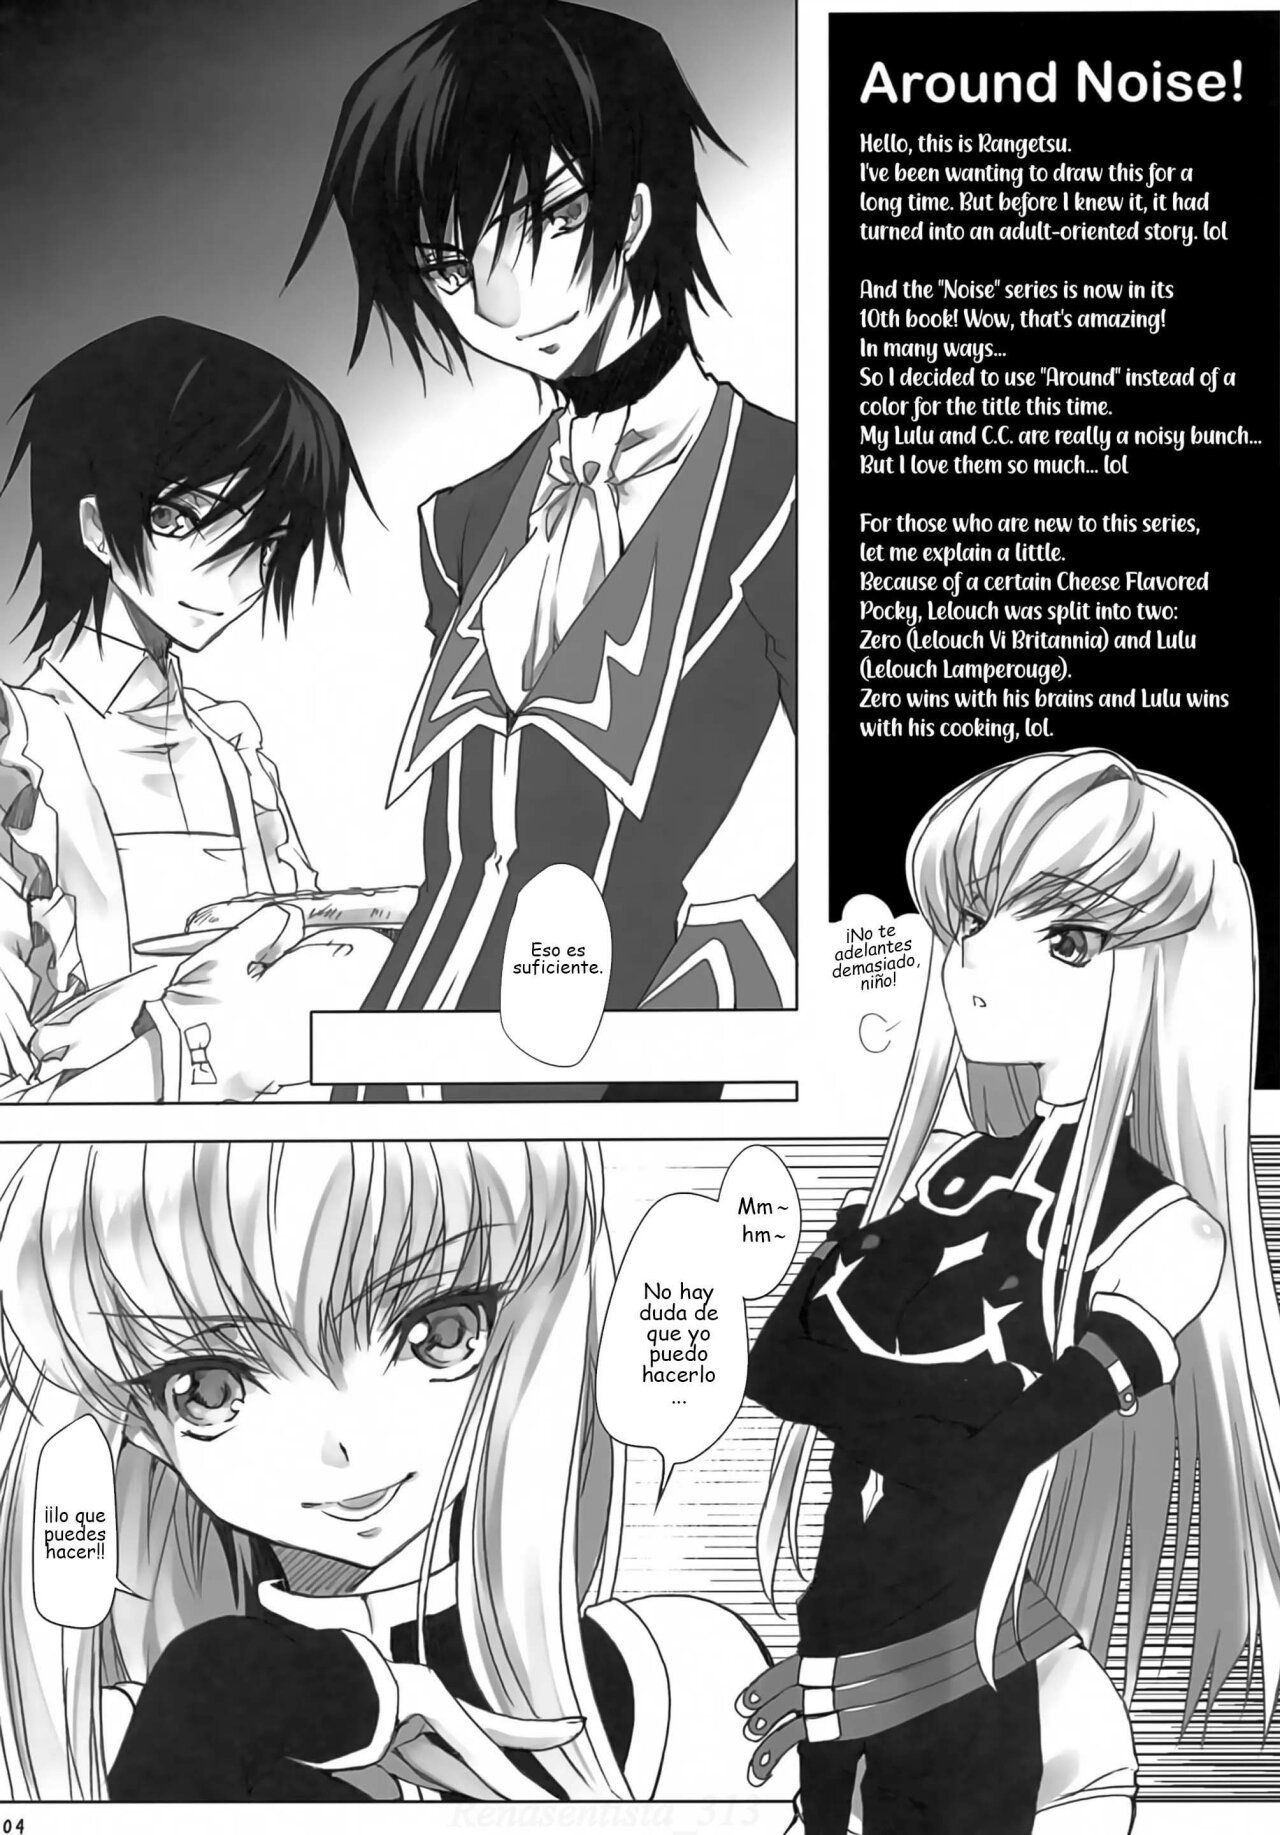 Code Geass Lelouch Of The Rebellion - Around Noise! - 3